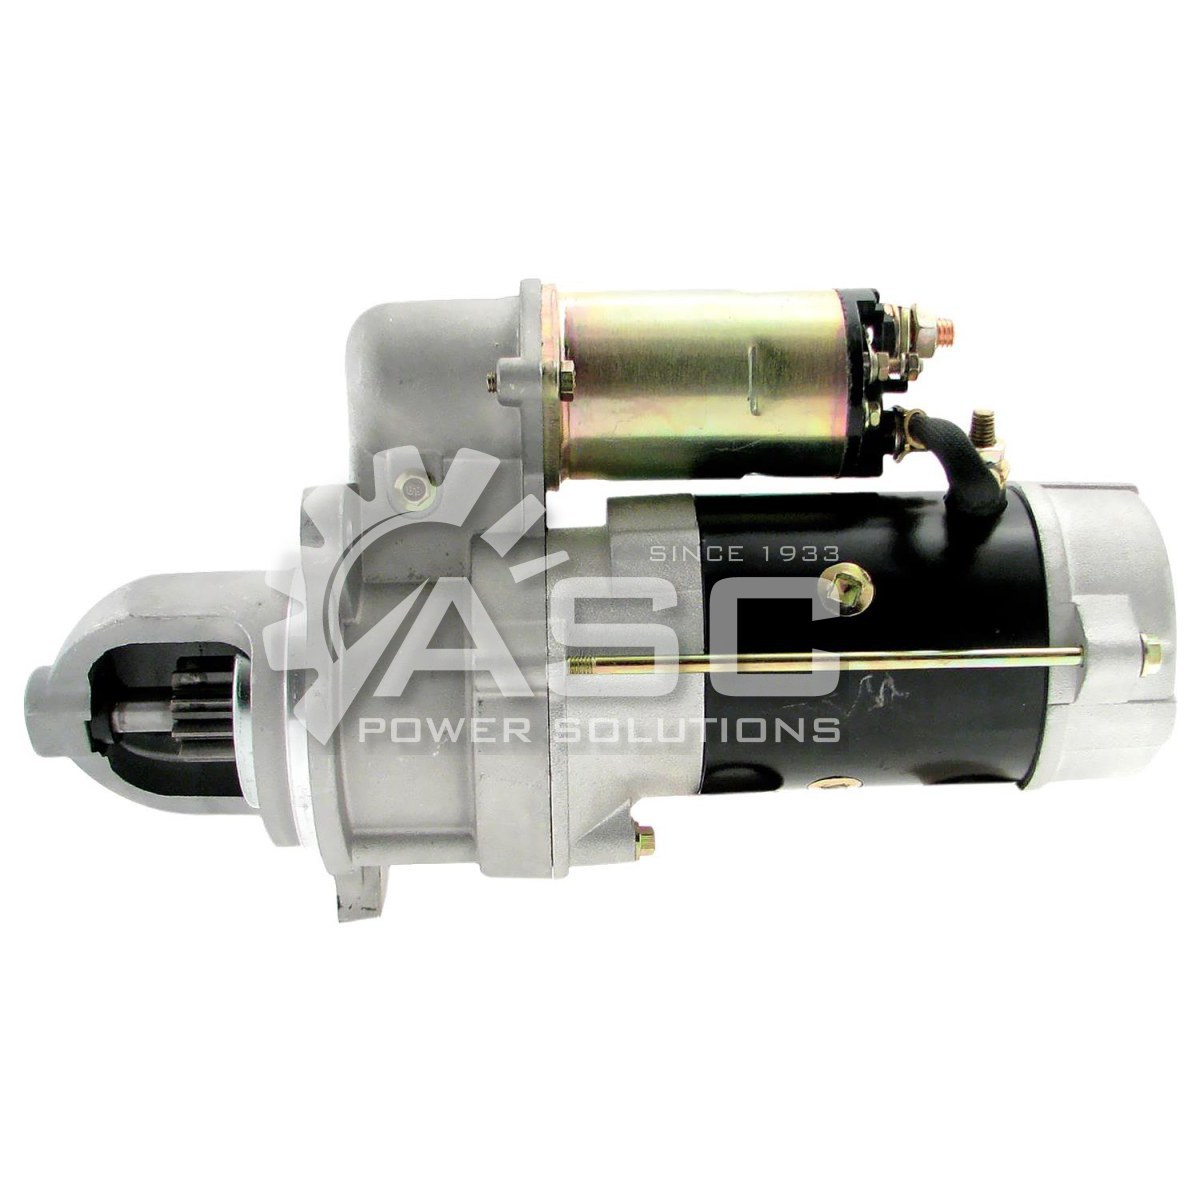 S122096_REMAN ASC POWER SOLUTIONS DELCO STARTER MOTOR FOR FORD AND CUMMINS 12V 10 TOOTH CLOCKWISE ROTATION OFF SET GEAR REDUCTION (OSGR)